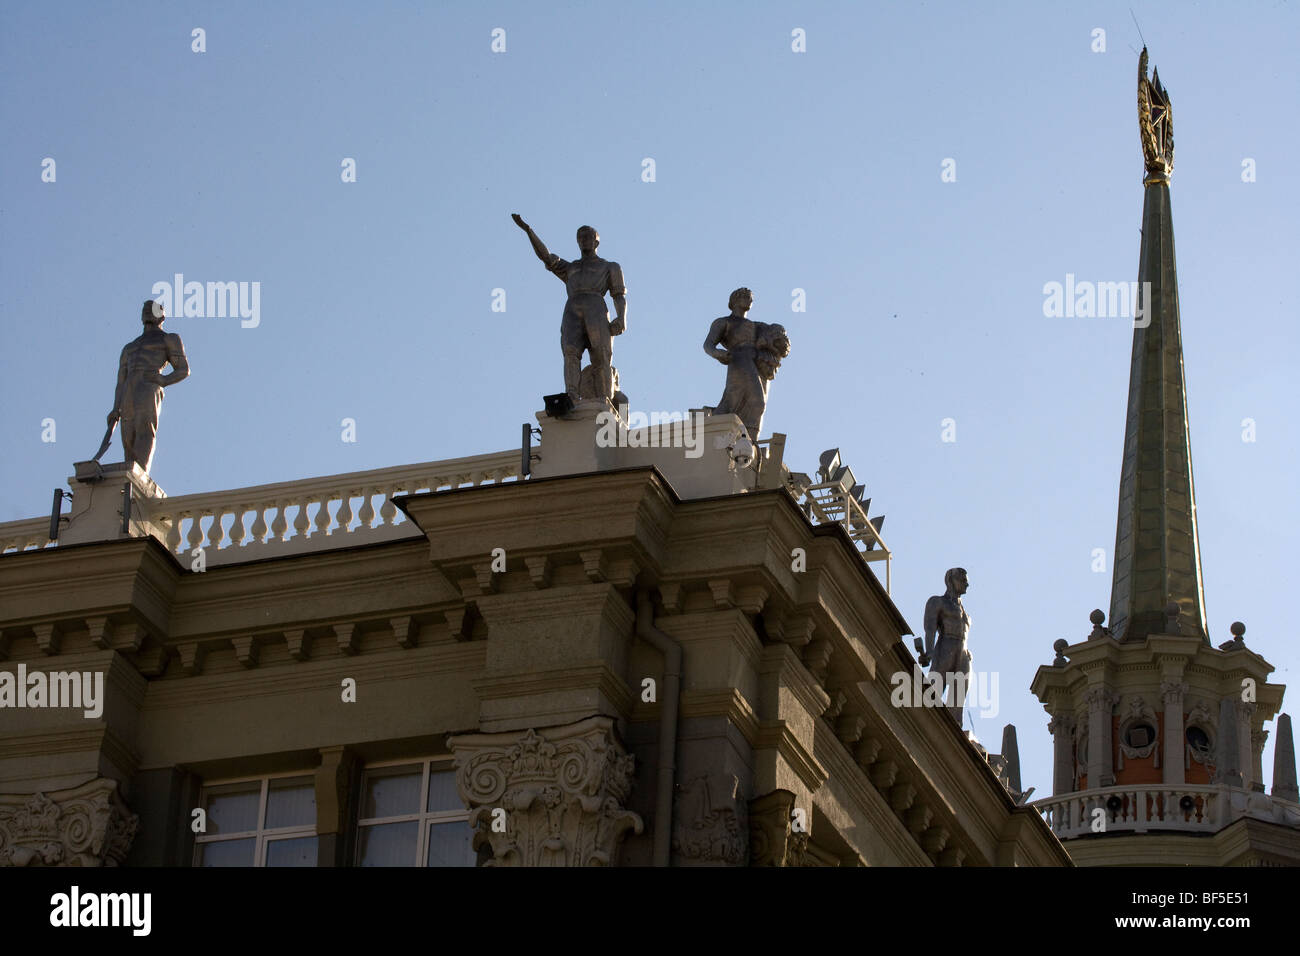 Soviet era civic building with statues and star, Yekaterinburg, Russia Stock Photo